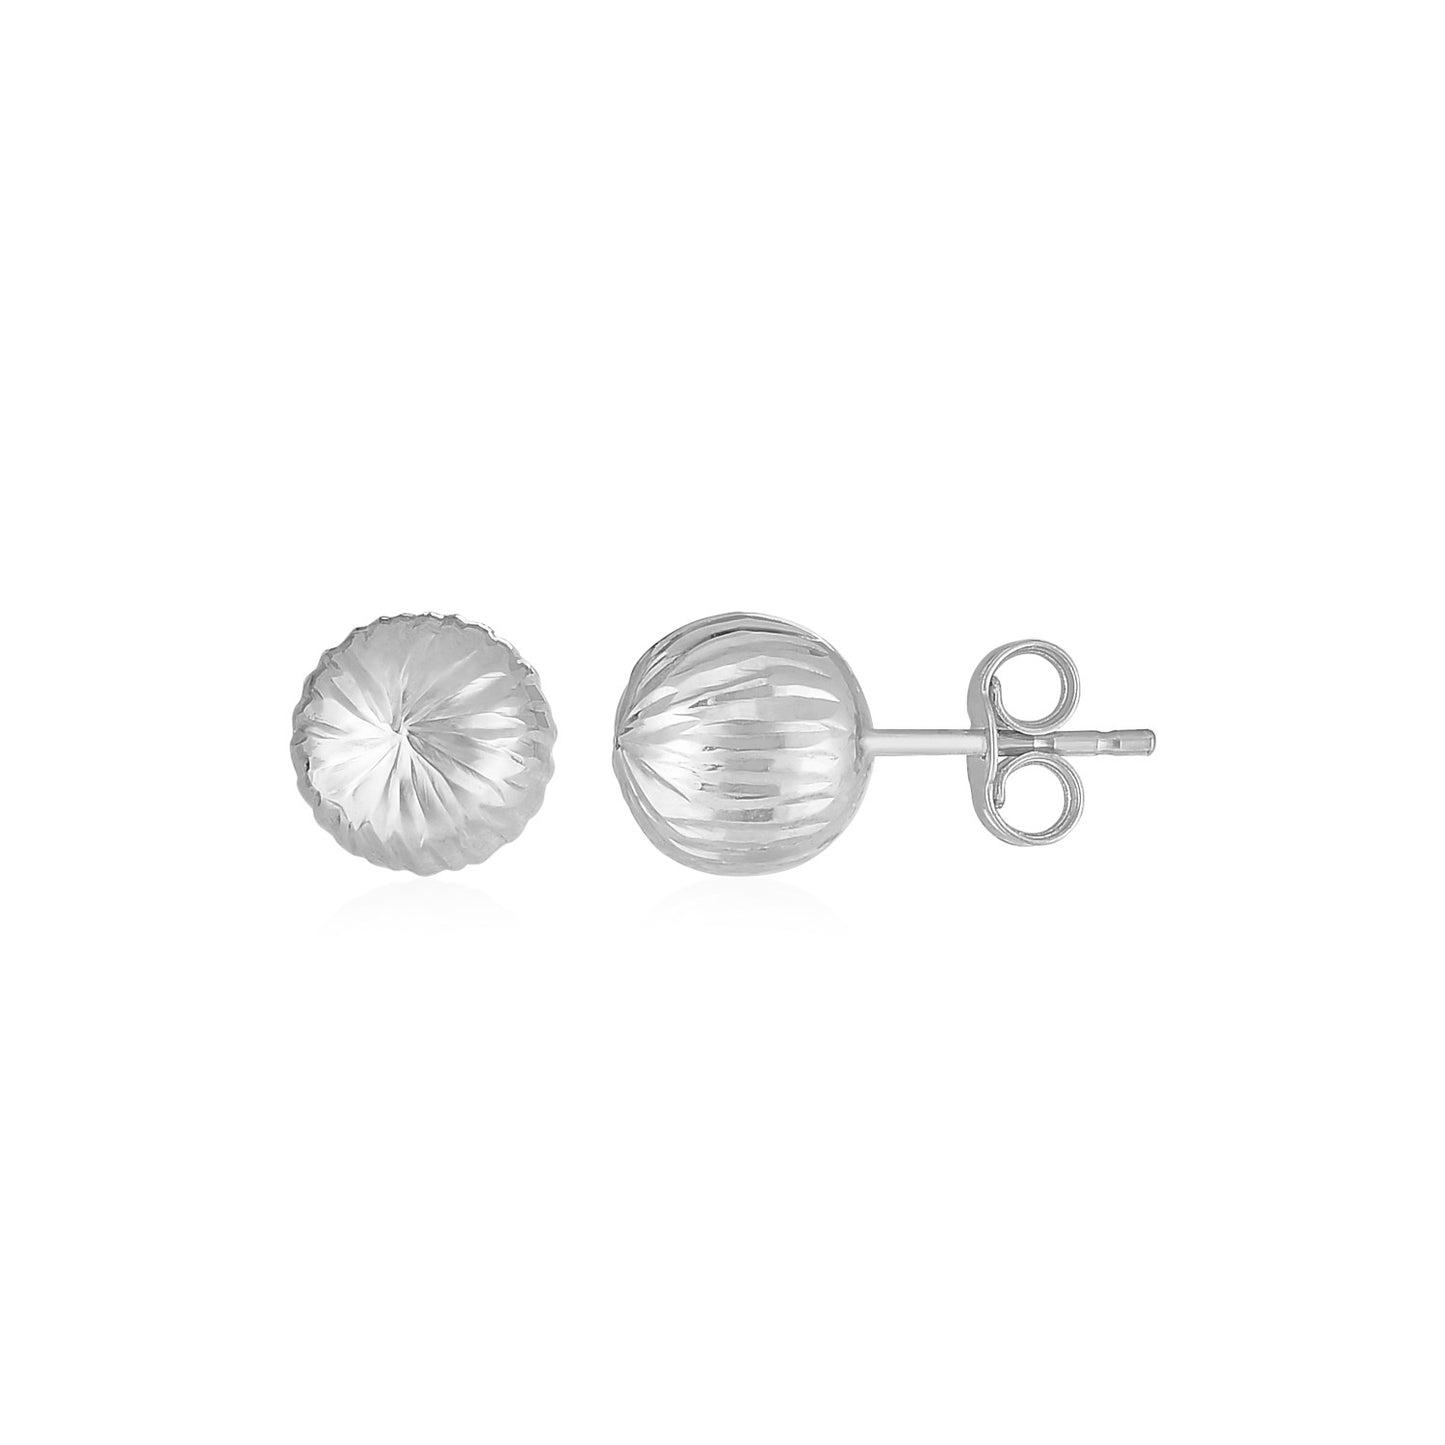 14K White Gold Ball Earrings with Linear Texture